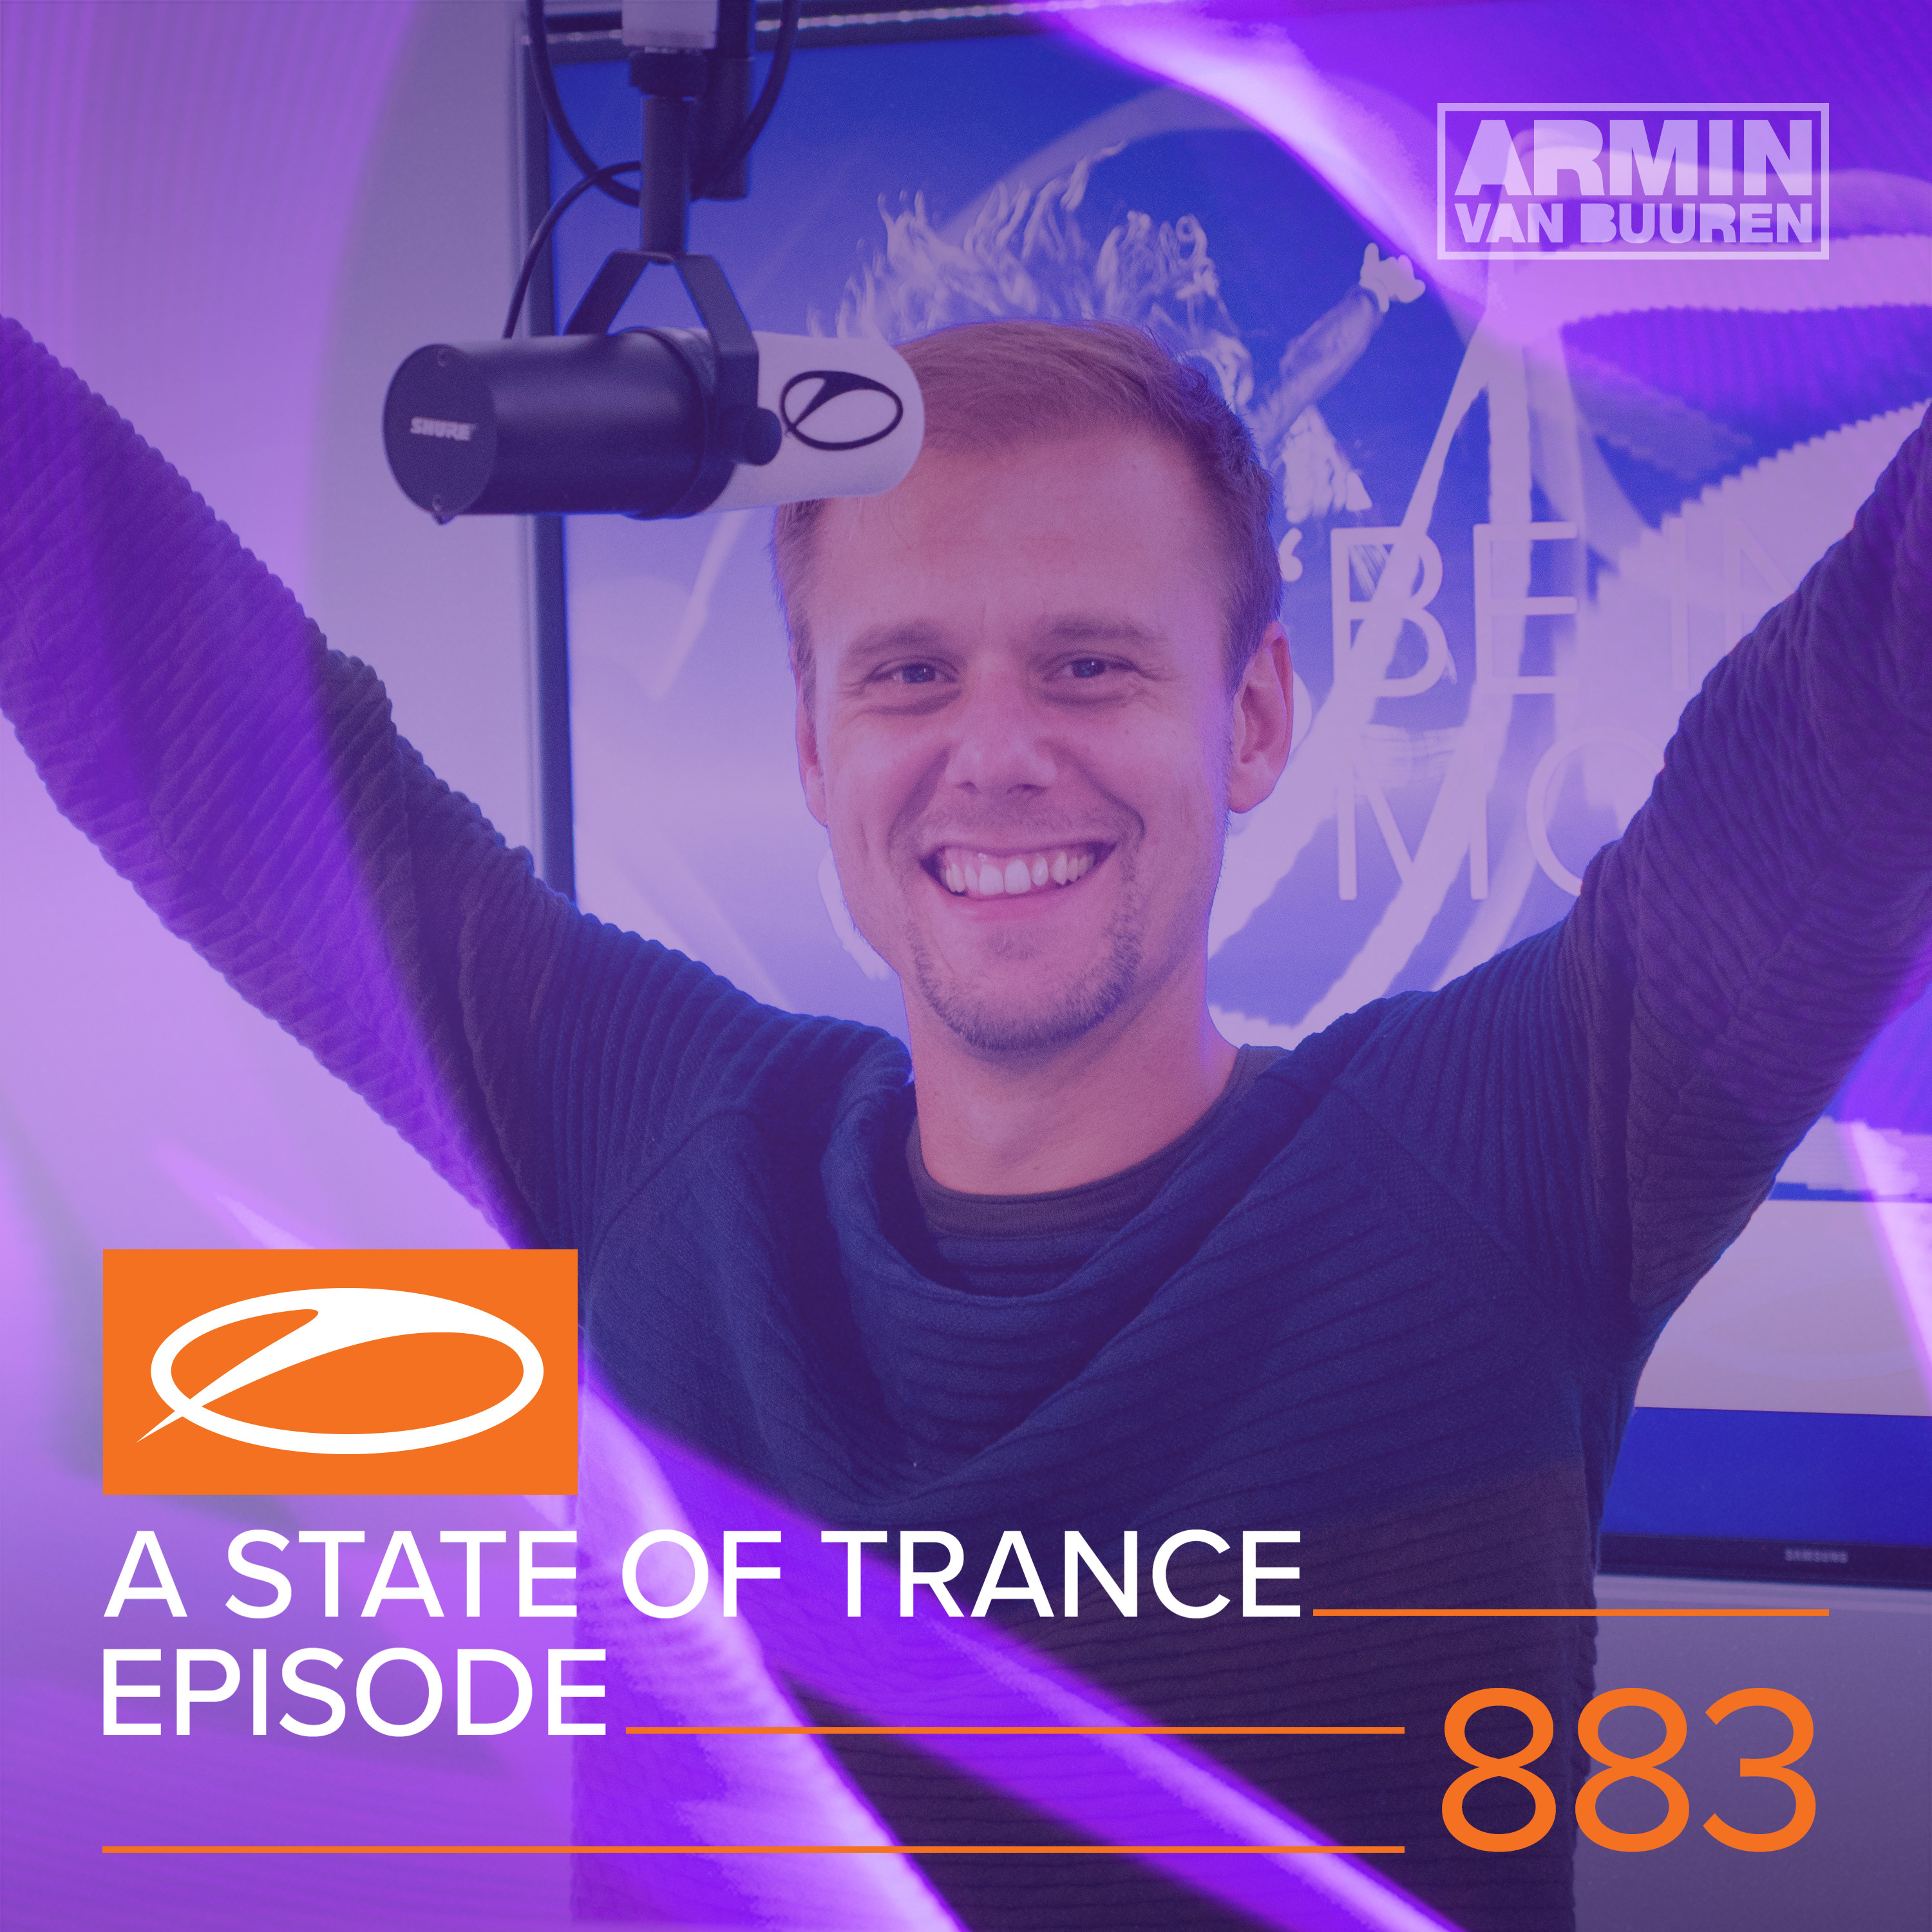 A State Of Trance (ASOT 883) (This Week's Service For Dreamers, Pt. 3)